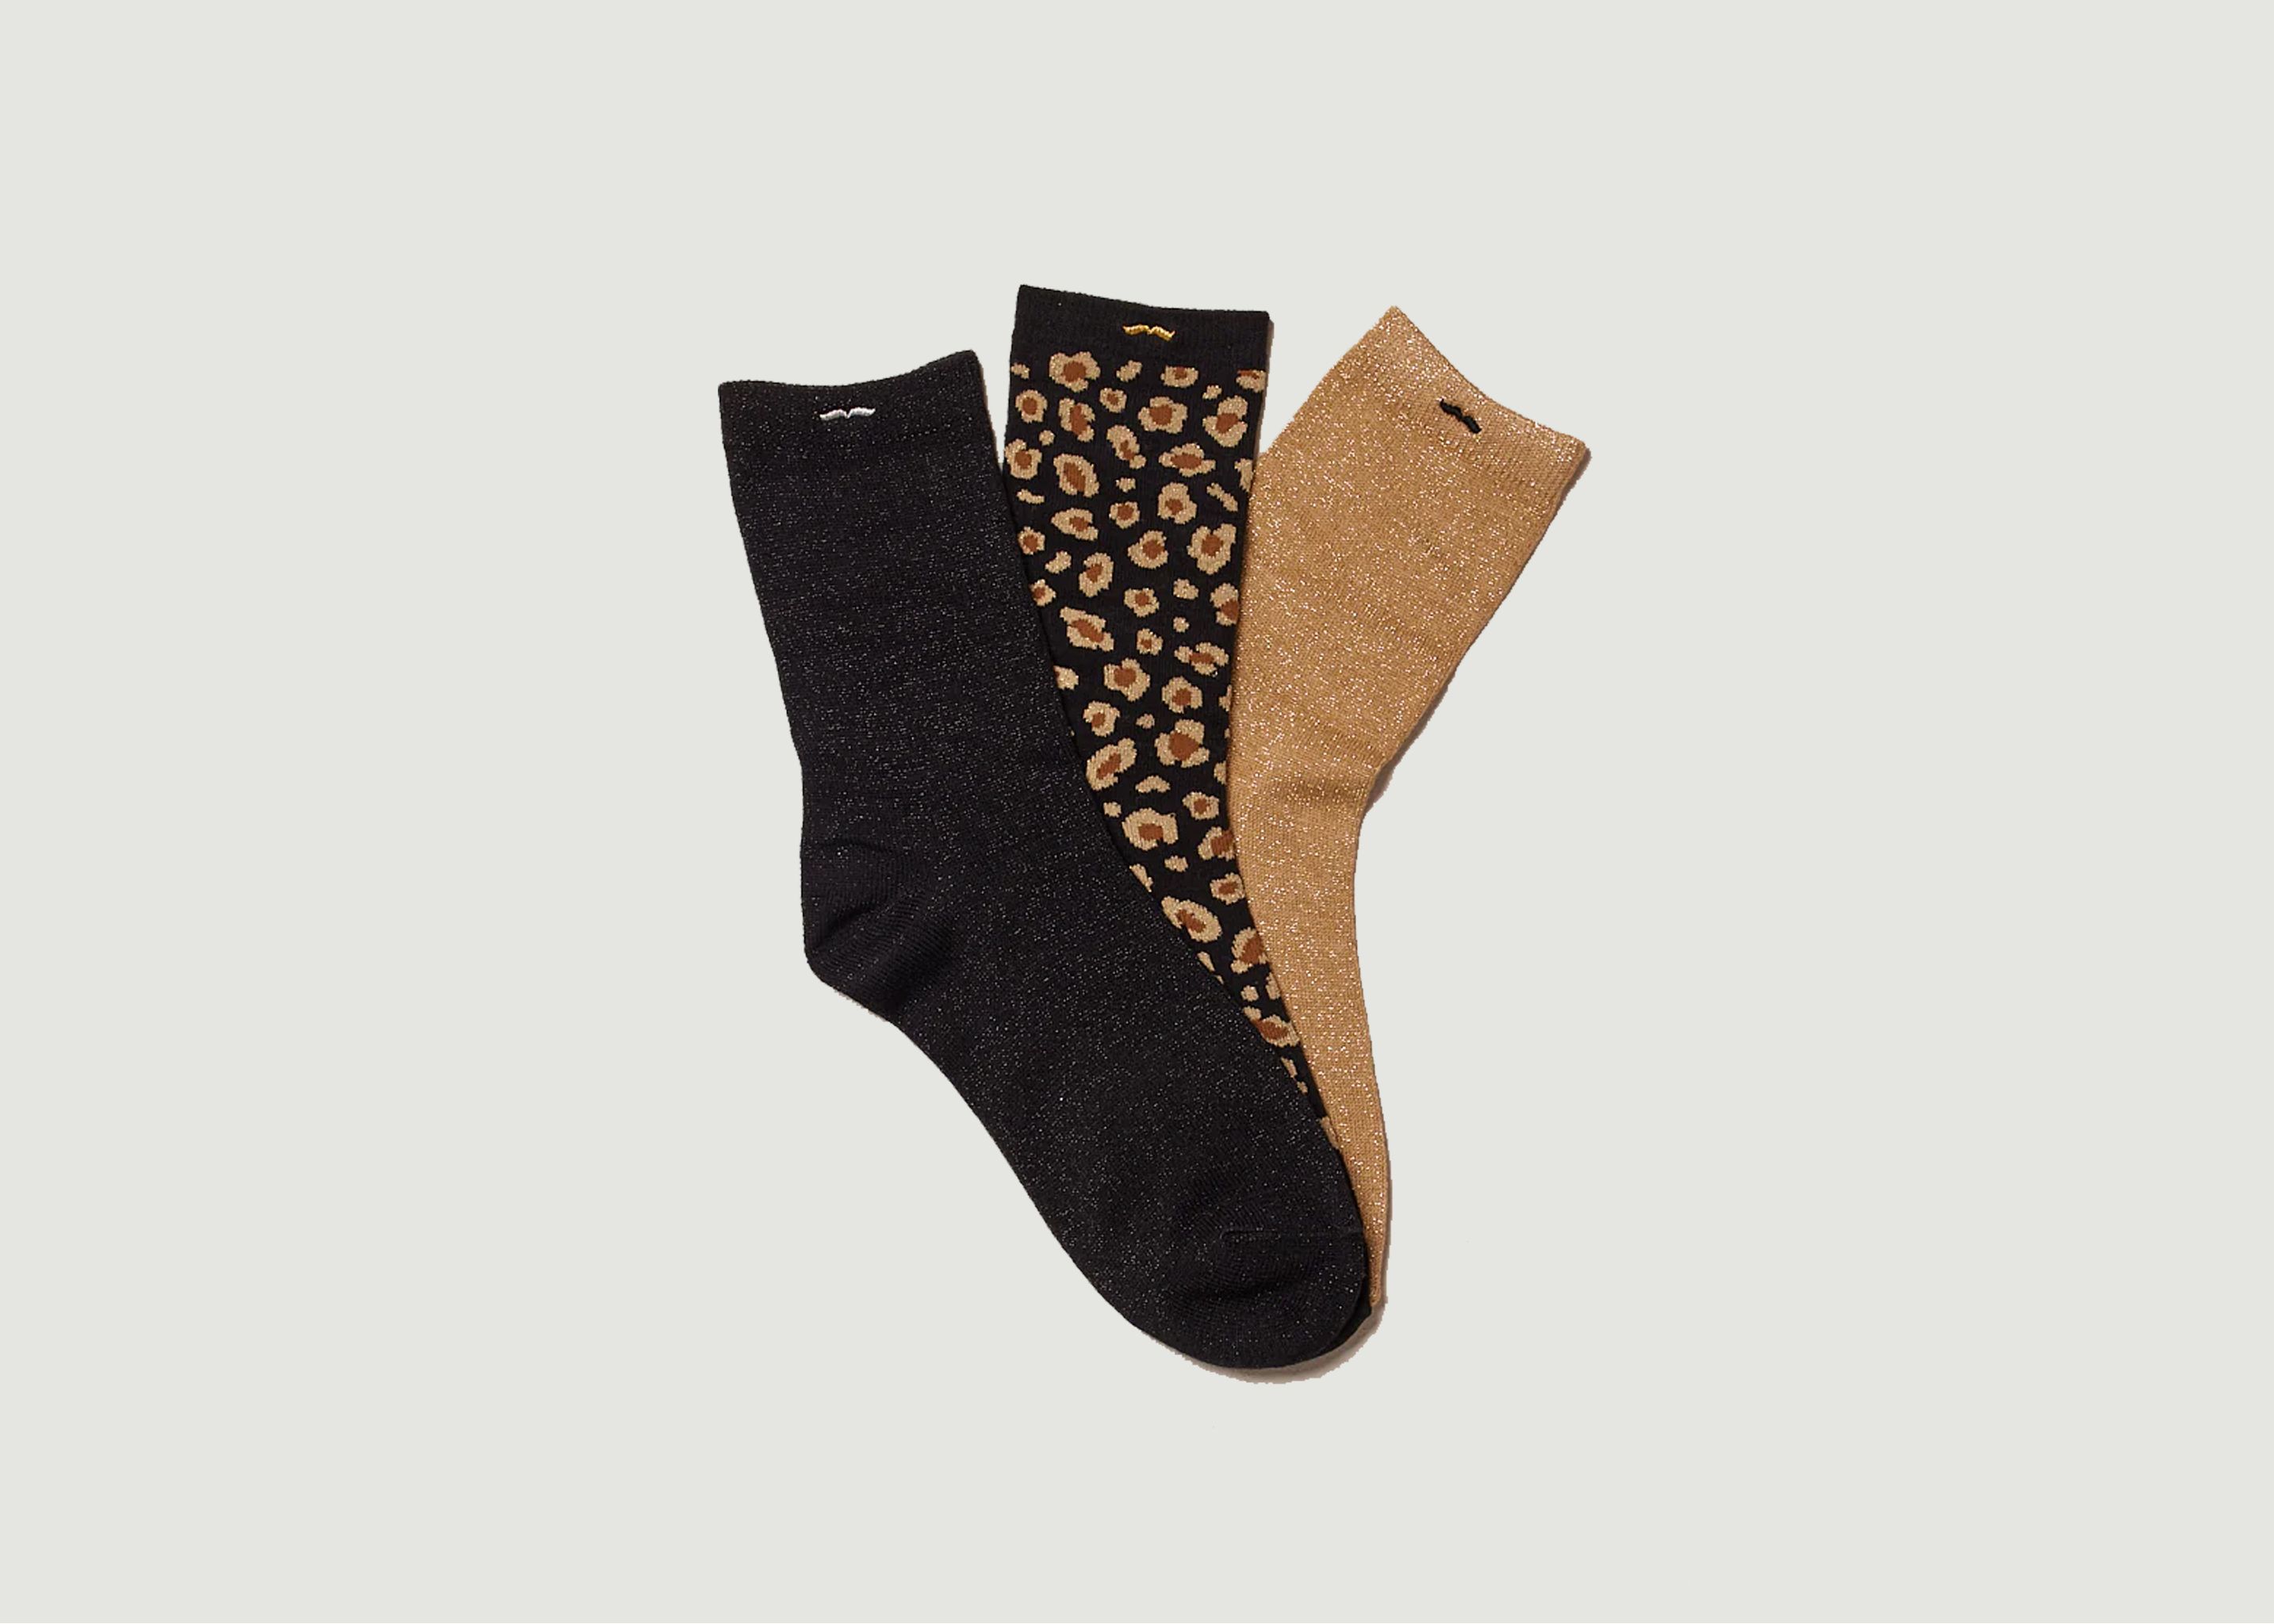 Packung mit 3 glossy leopard print socks - M.Moustache